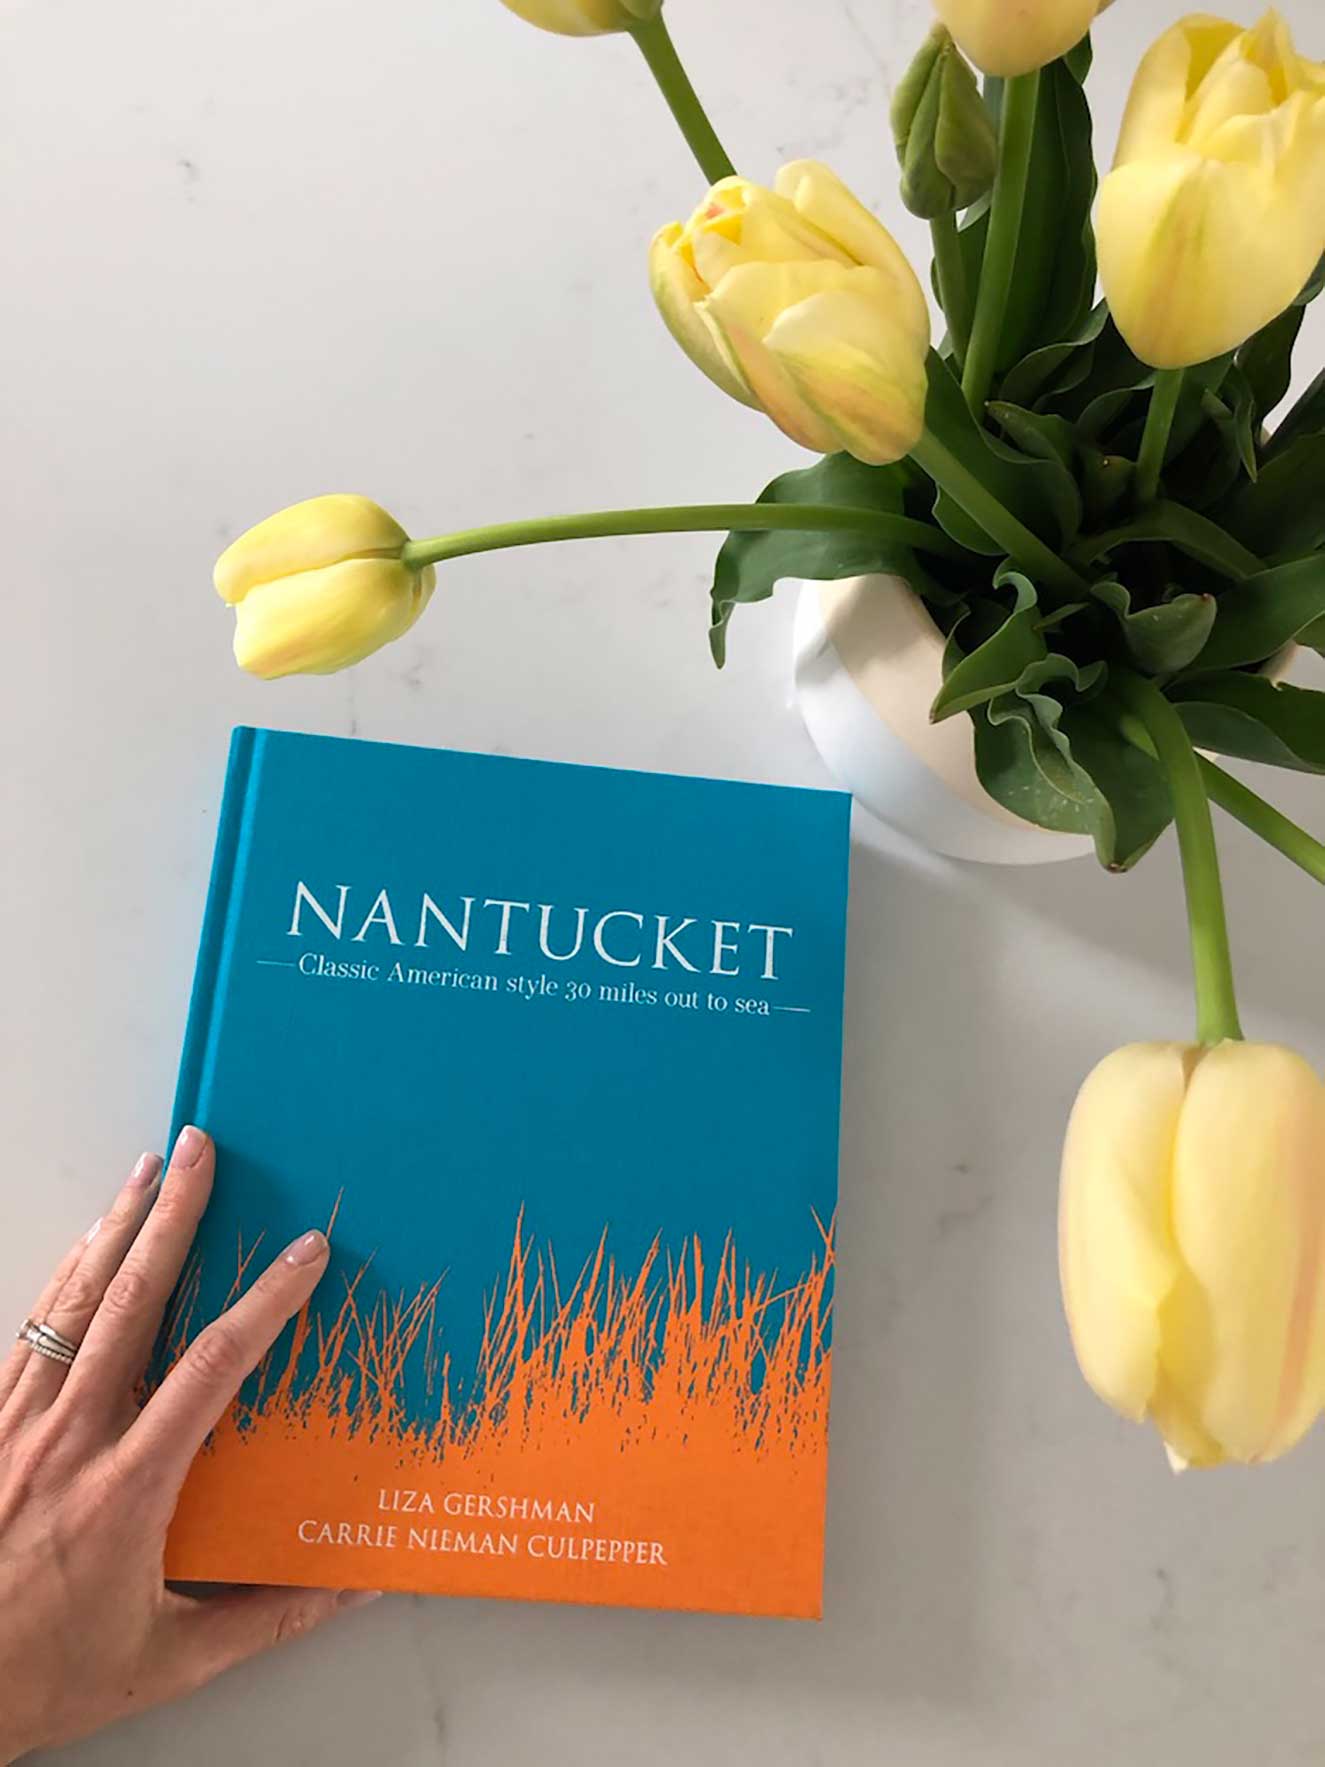 Nantucket: Classic American Style 30 Miles Out to Sea